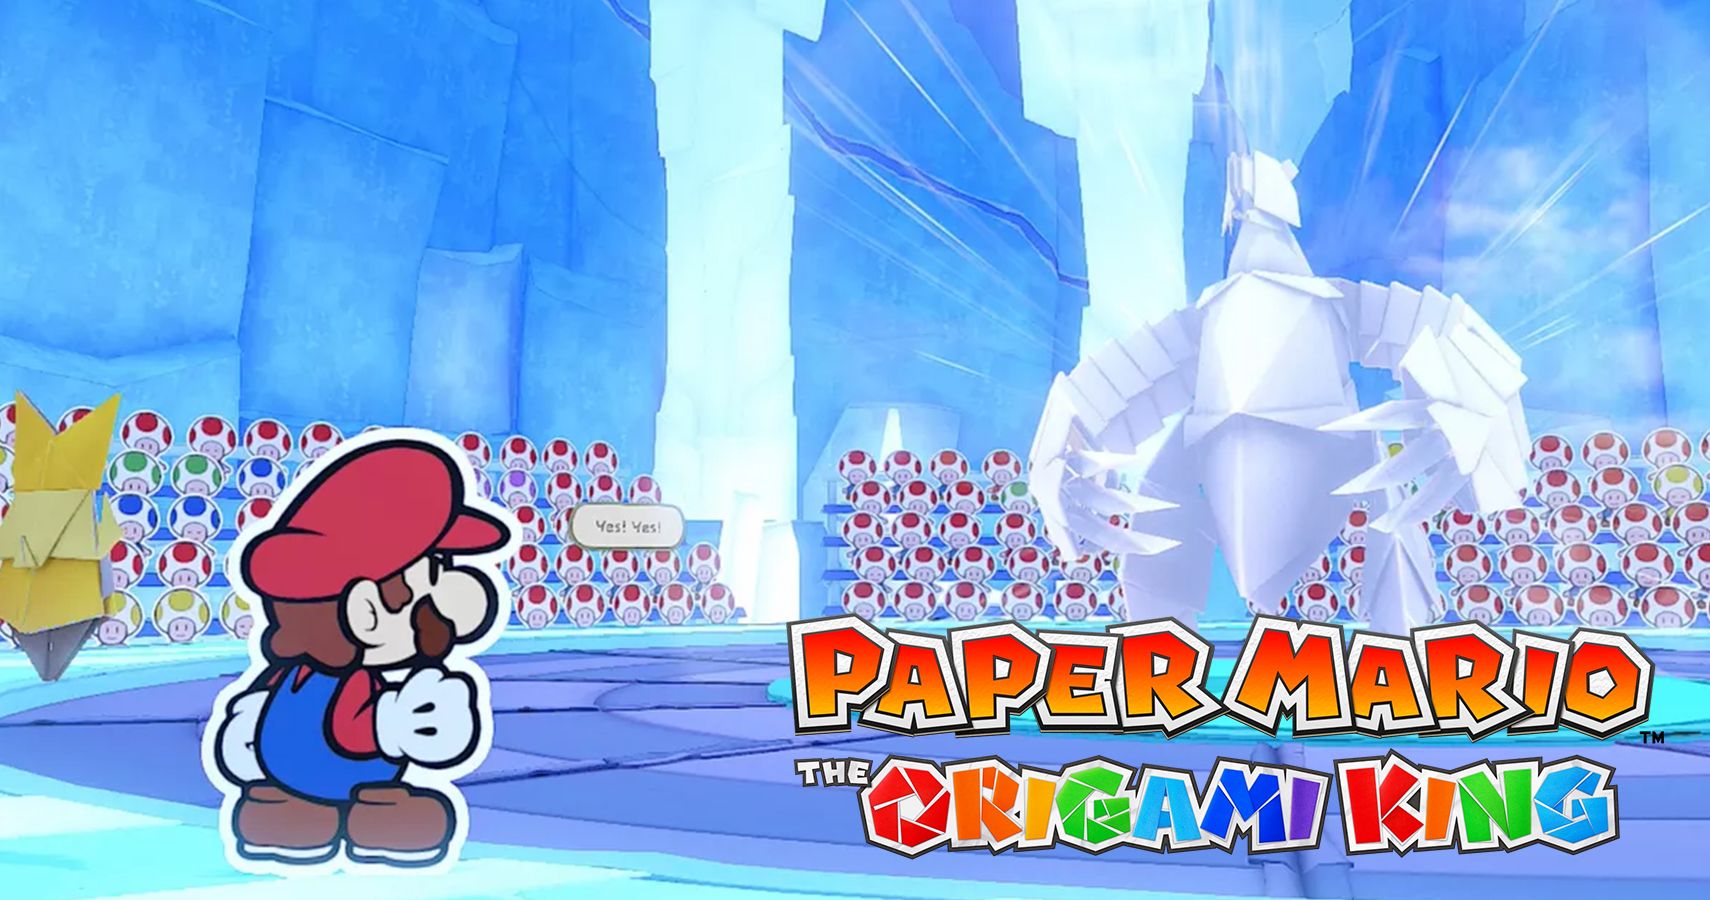 Paper Mario The Origami King Ice stage boss fight